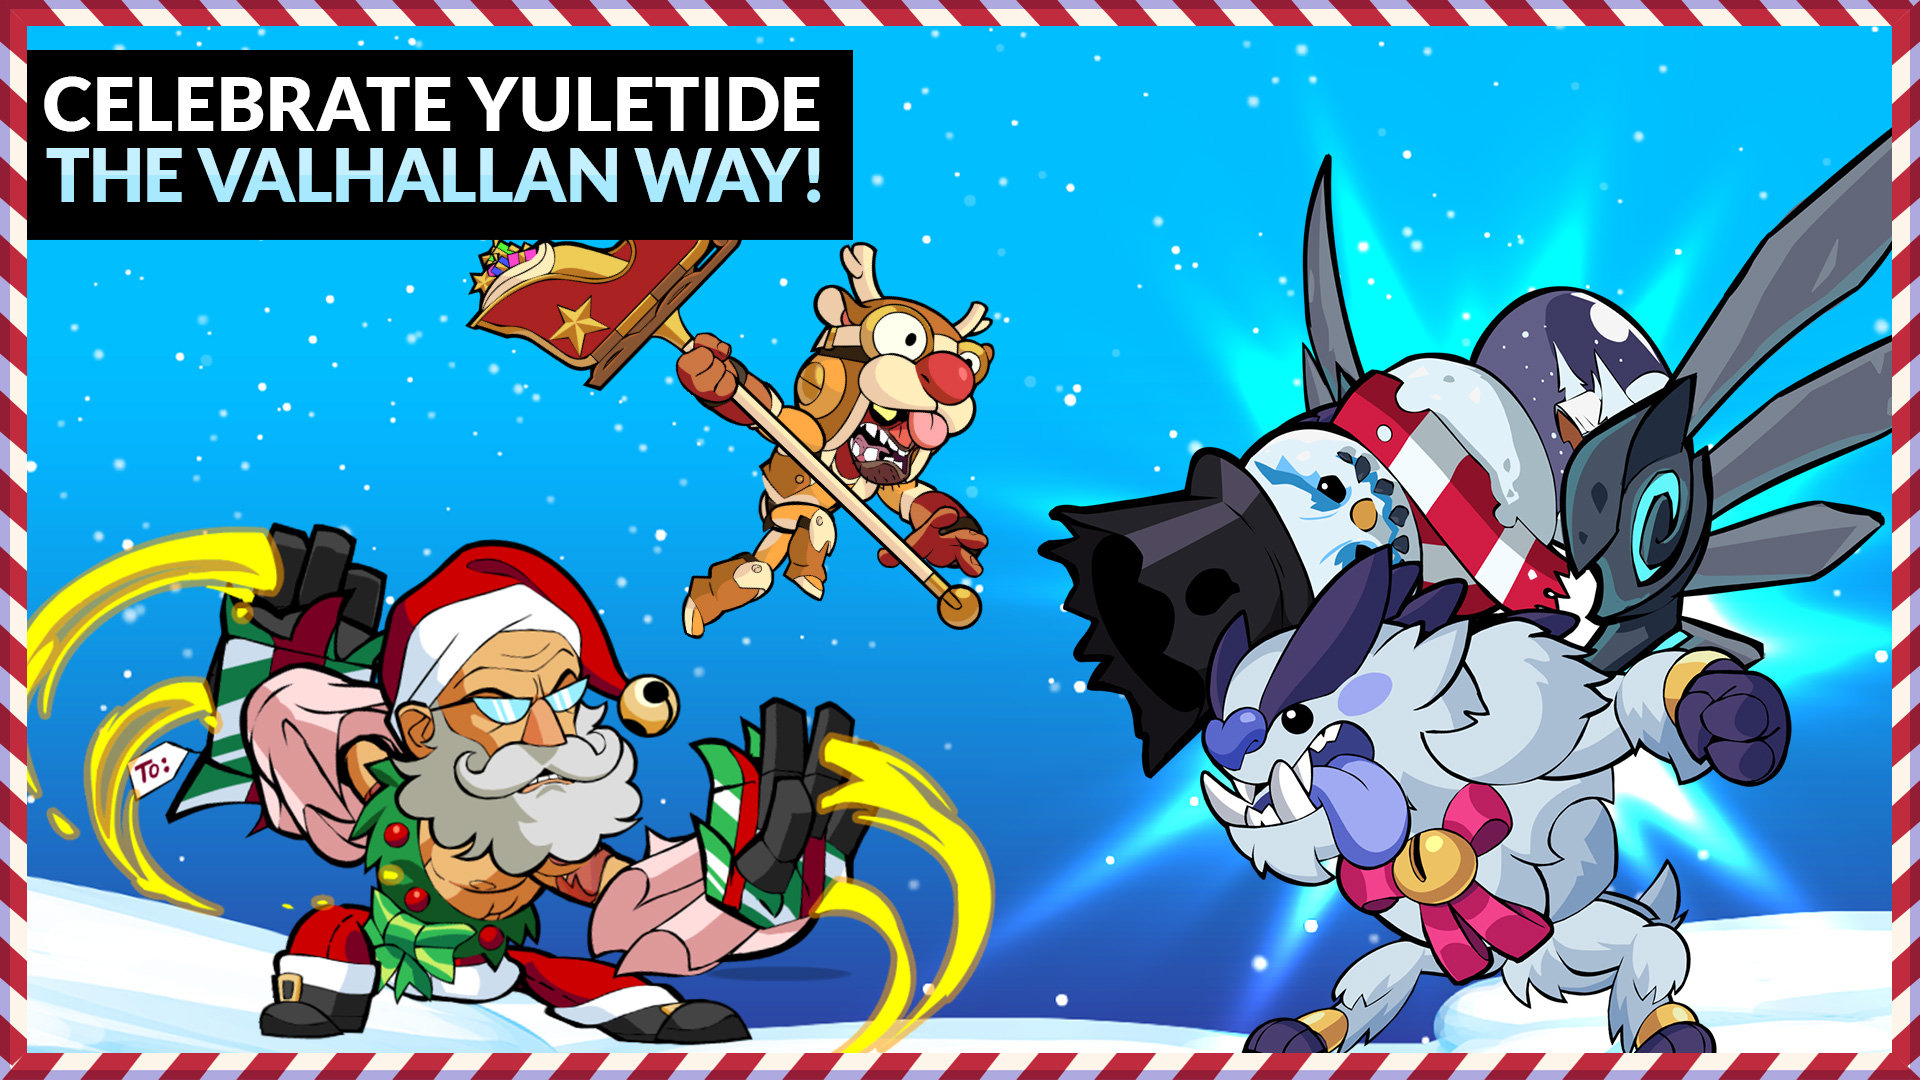 Gather ‘round the Yule Tree in Brawlhallidays 2021!